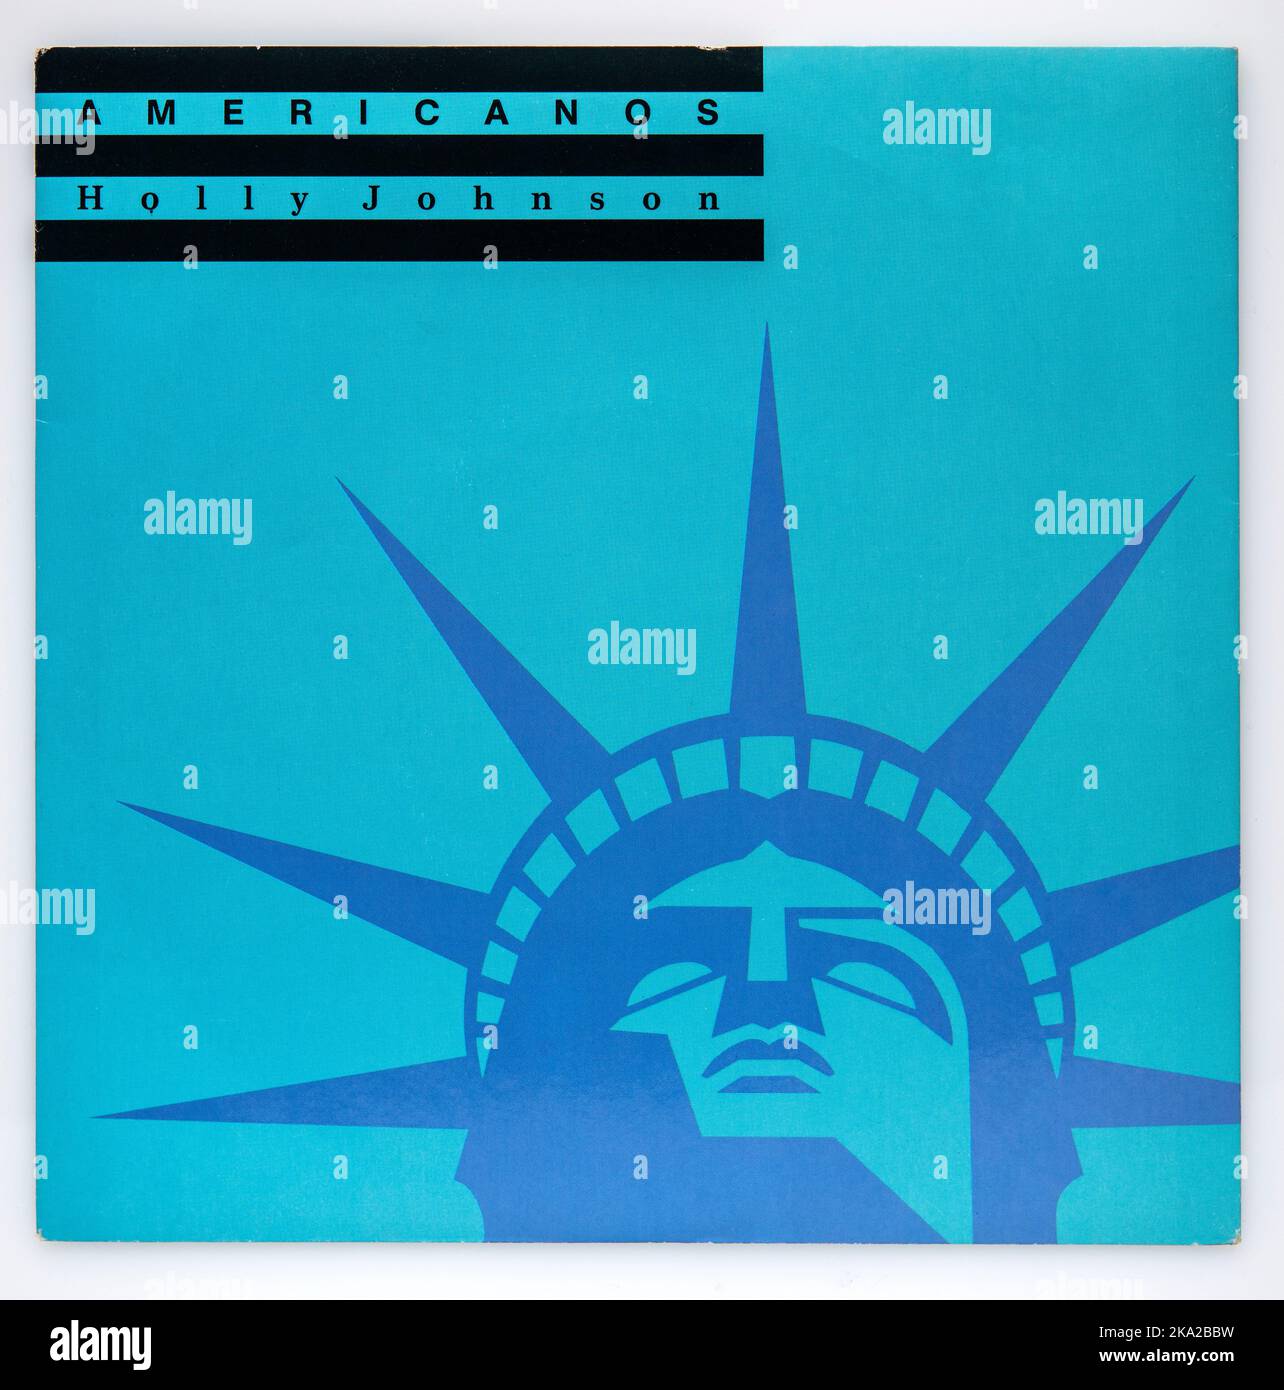 Seven inch vinyl picture cover of the single Americanos by Holly Johnson, which was released in 1989 Stock Photo